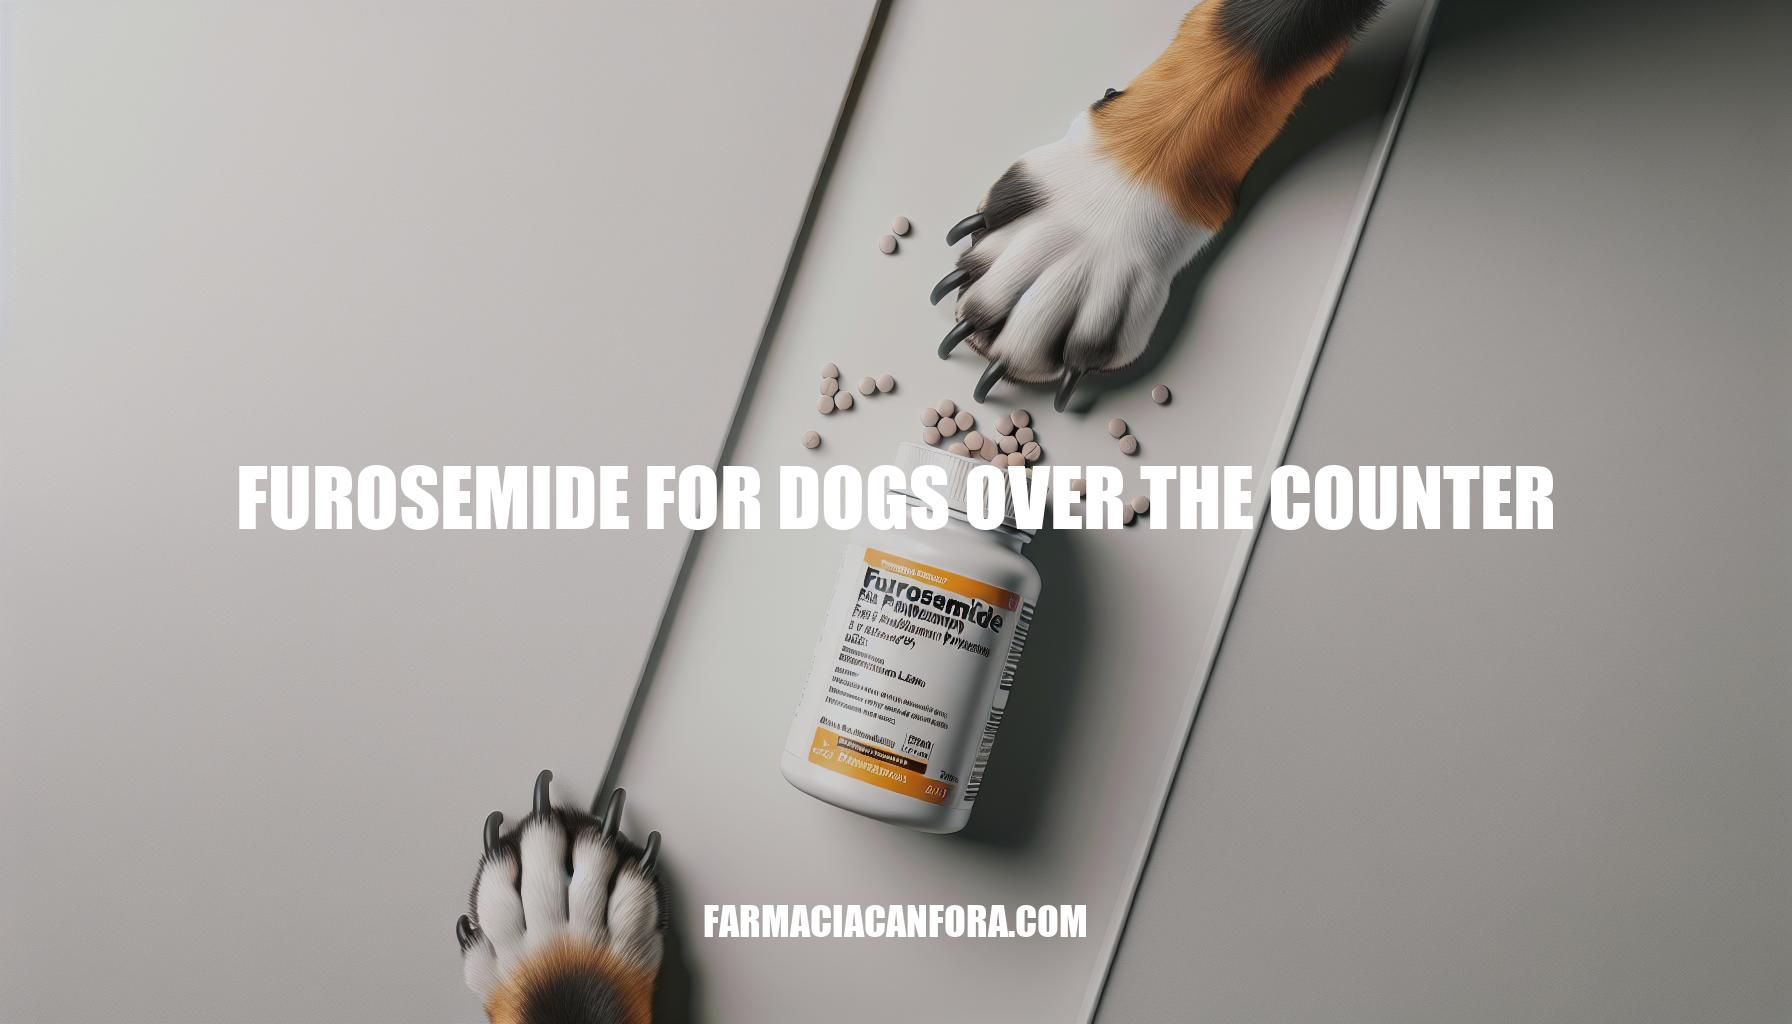 Furosemide for Dogs Over the Counter: Guidelines and Considerations